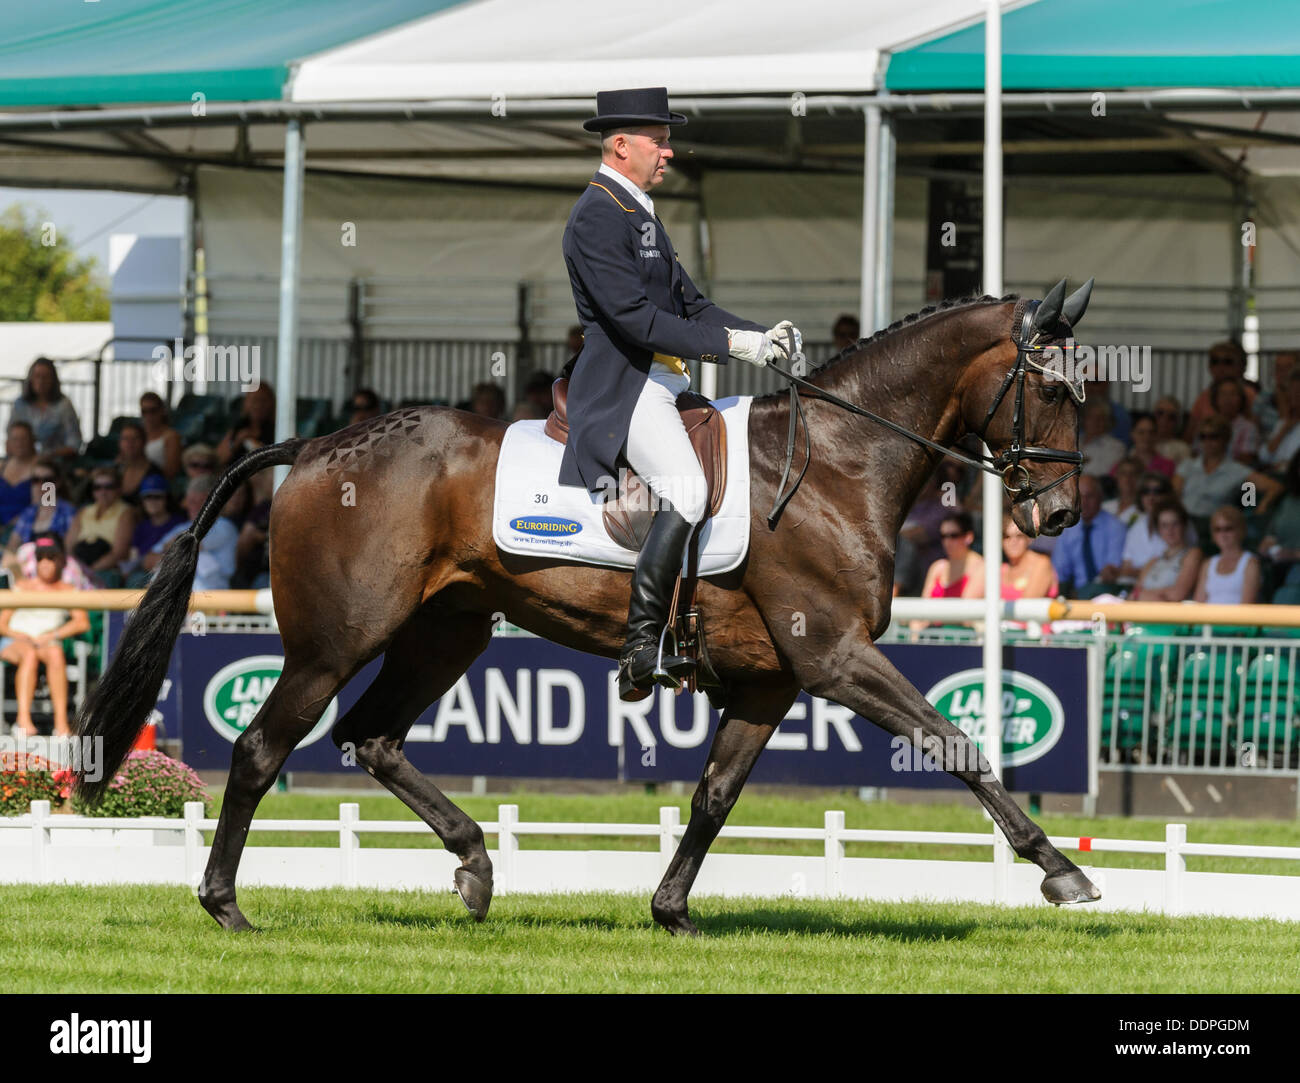 Burghley House, Stamford, UK. 5th September 2013. Andreas Dibowski and FRH BUTTS LEON - The Dressage phase,  Land Rover Burghley Horse Trials, 5th September 2013. Credit:  Nico Morgan/Alamy Live News Stock Photo